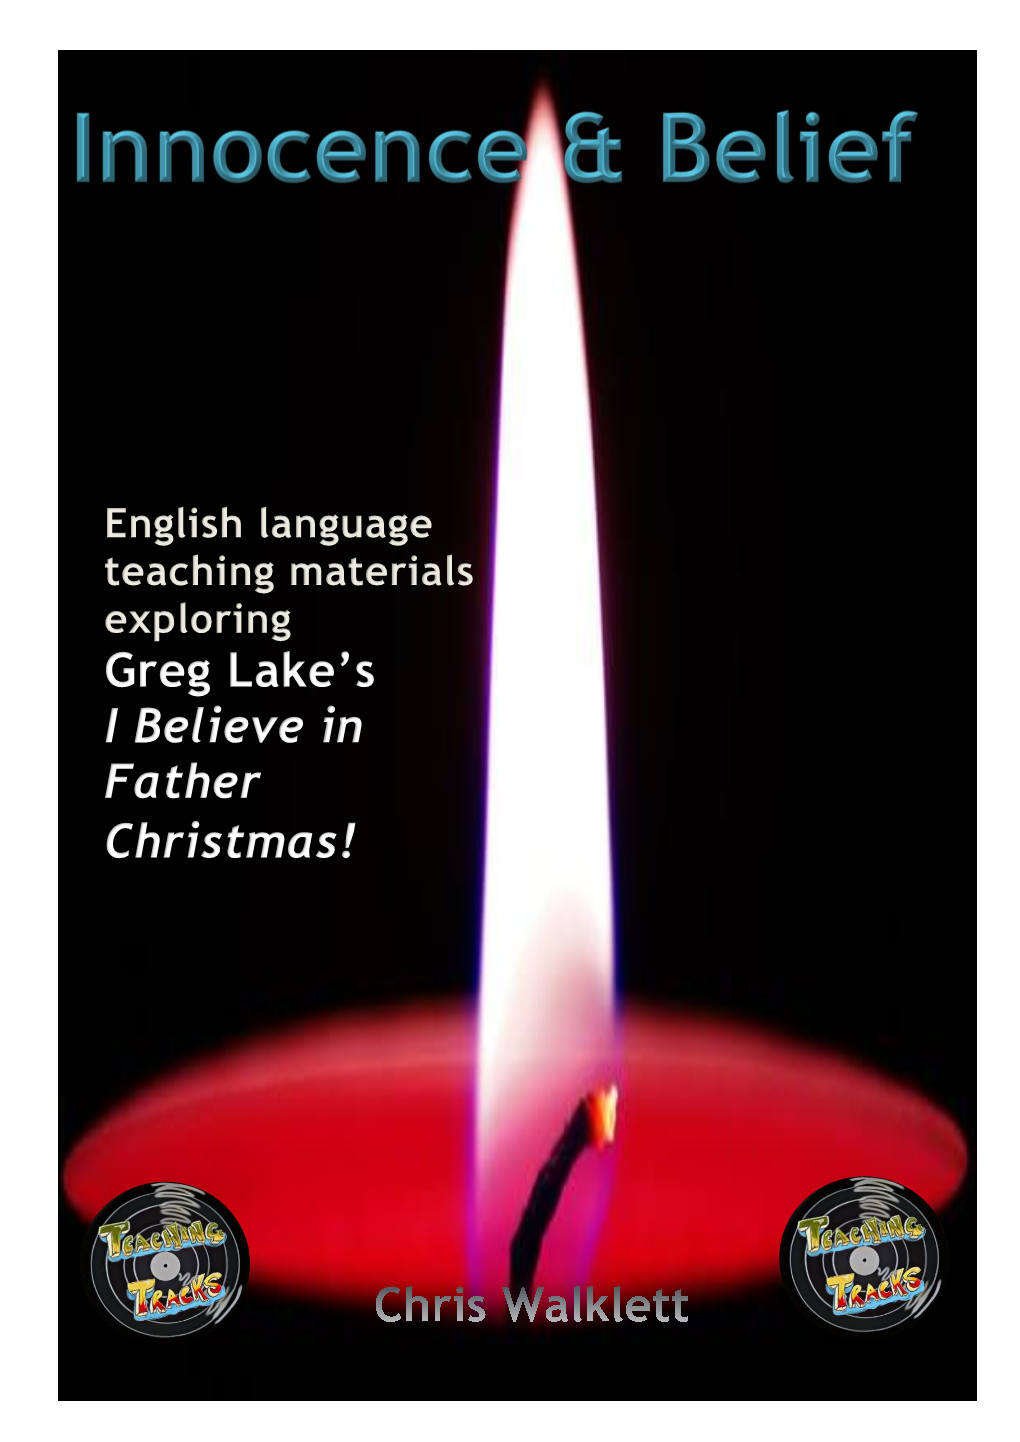 Greg Lake's I Believe in Father Christmas!